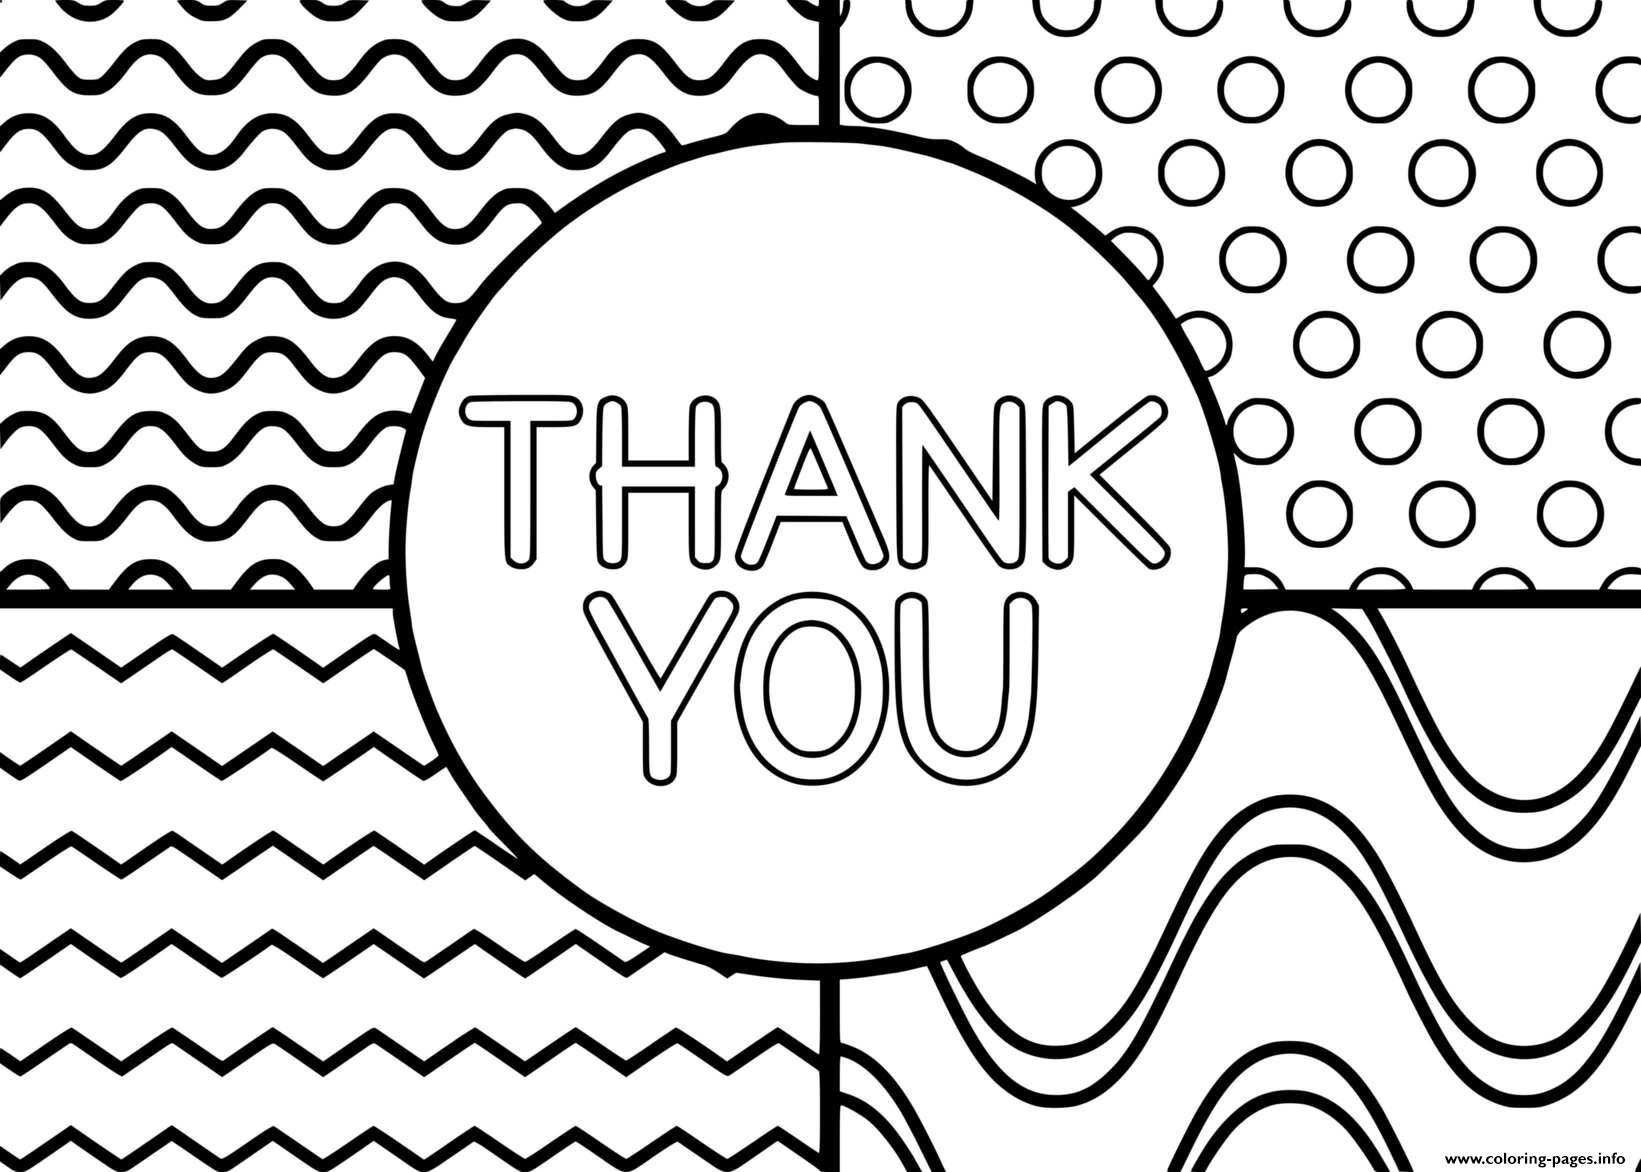 thank-you-card-coloring-page-printable-150-printable-thank-you-cards